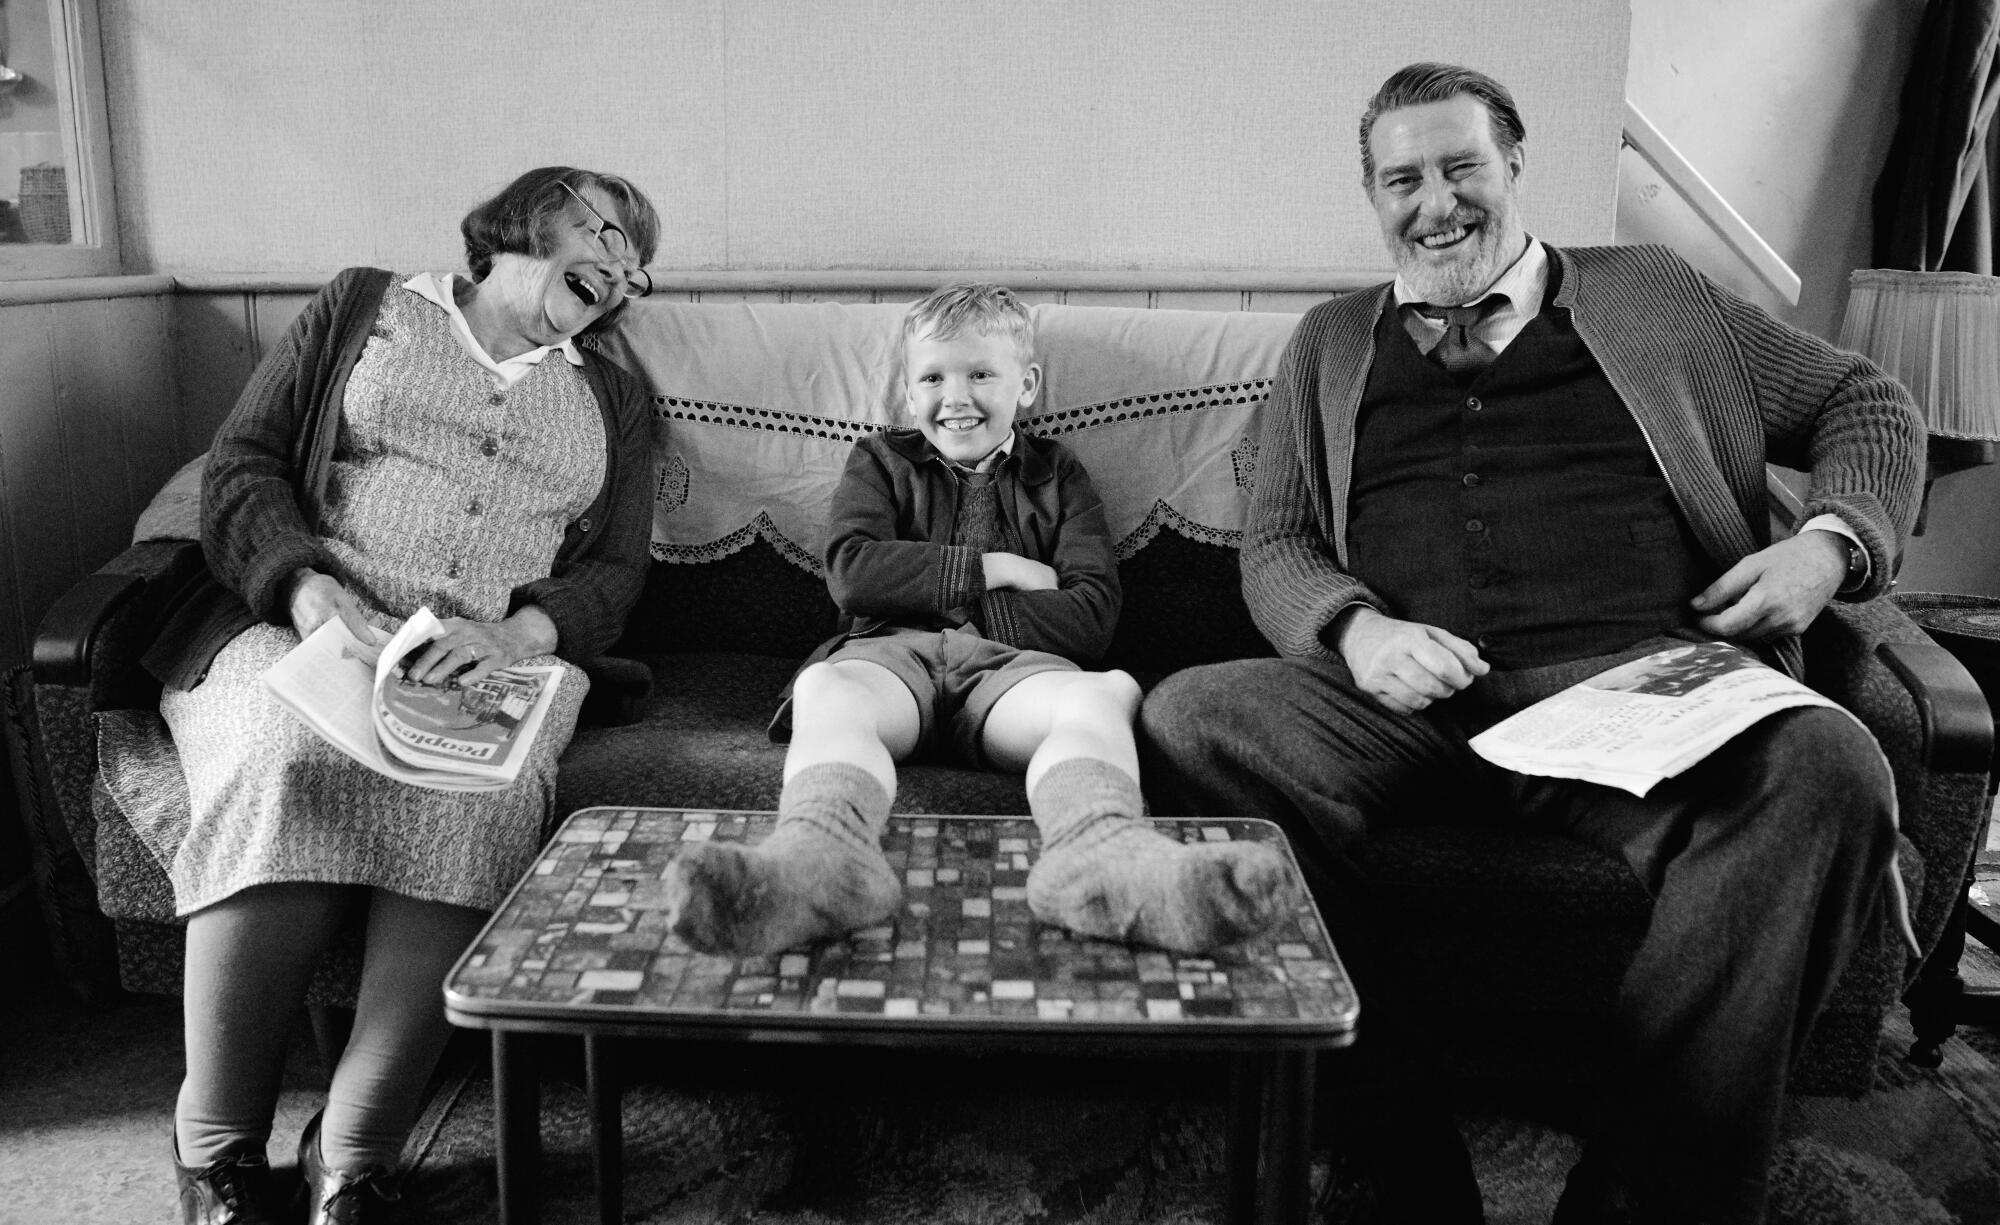 Judi Dench, Jude Hill and Ciarán Hinds have a laugh on the couch in a scene from “Belfast.”